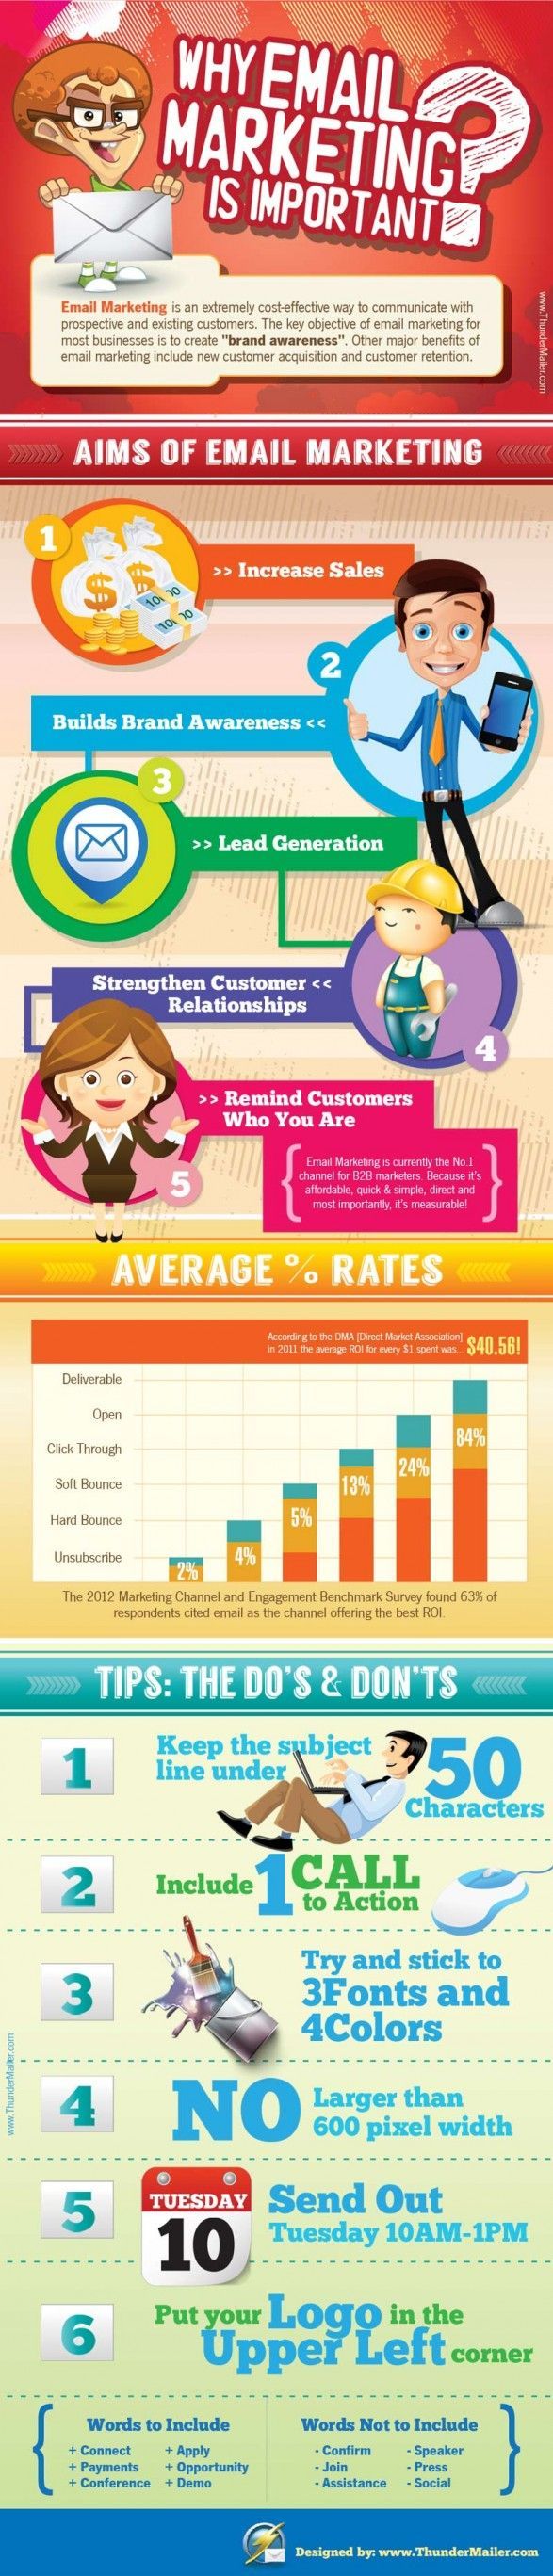 Why Email Marketing Is Important? [Infographic]